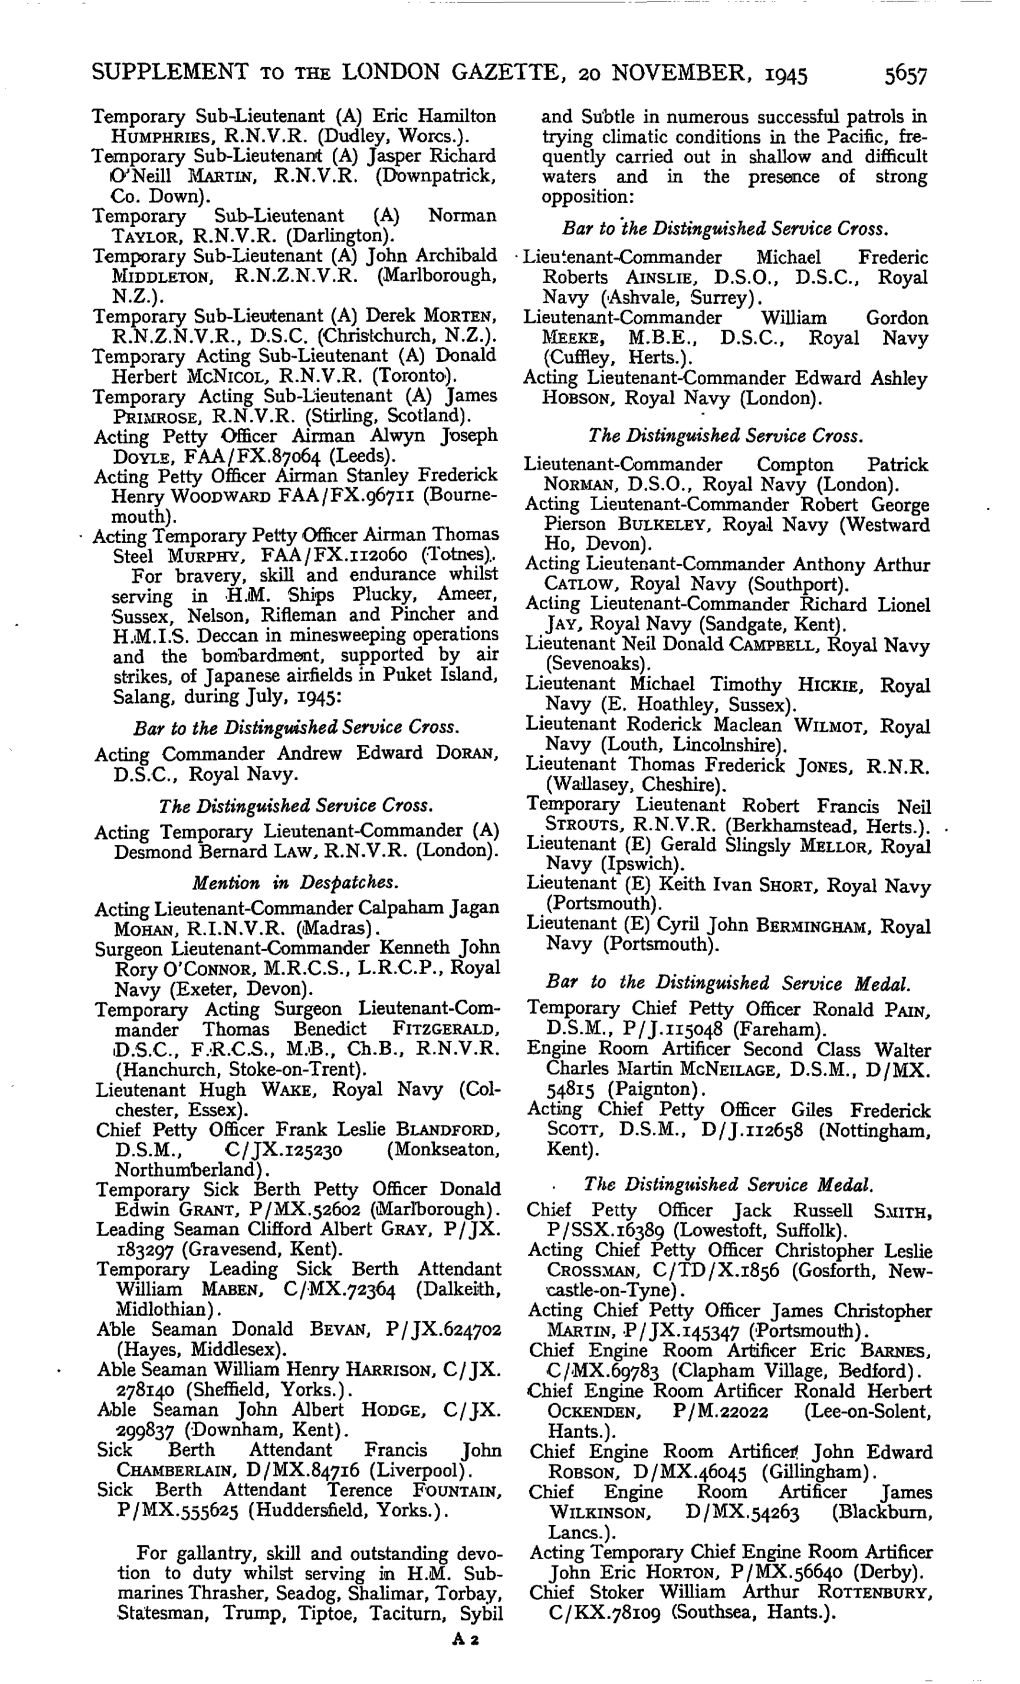 SUPPLEMENT to the LONDON GAZETTE, 20 NOVEMBER, 1945 5657 Temporary Sub-Lieutenant (A) Eric Hamilton and Subtle in Numerous Successful Patrols in HUMPHRIES, R.N.V.R